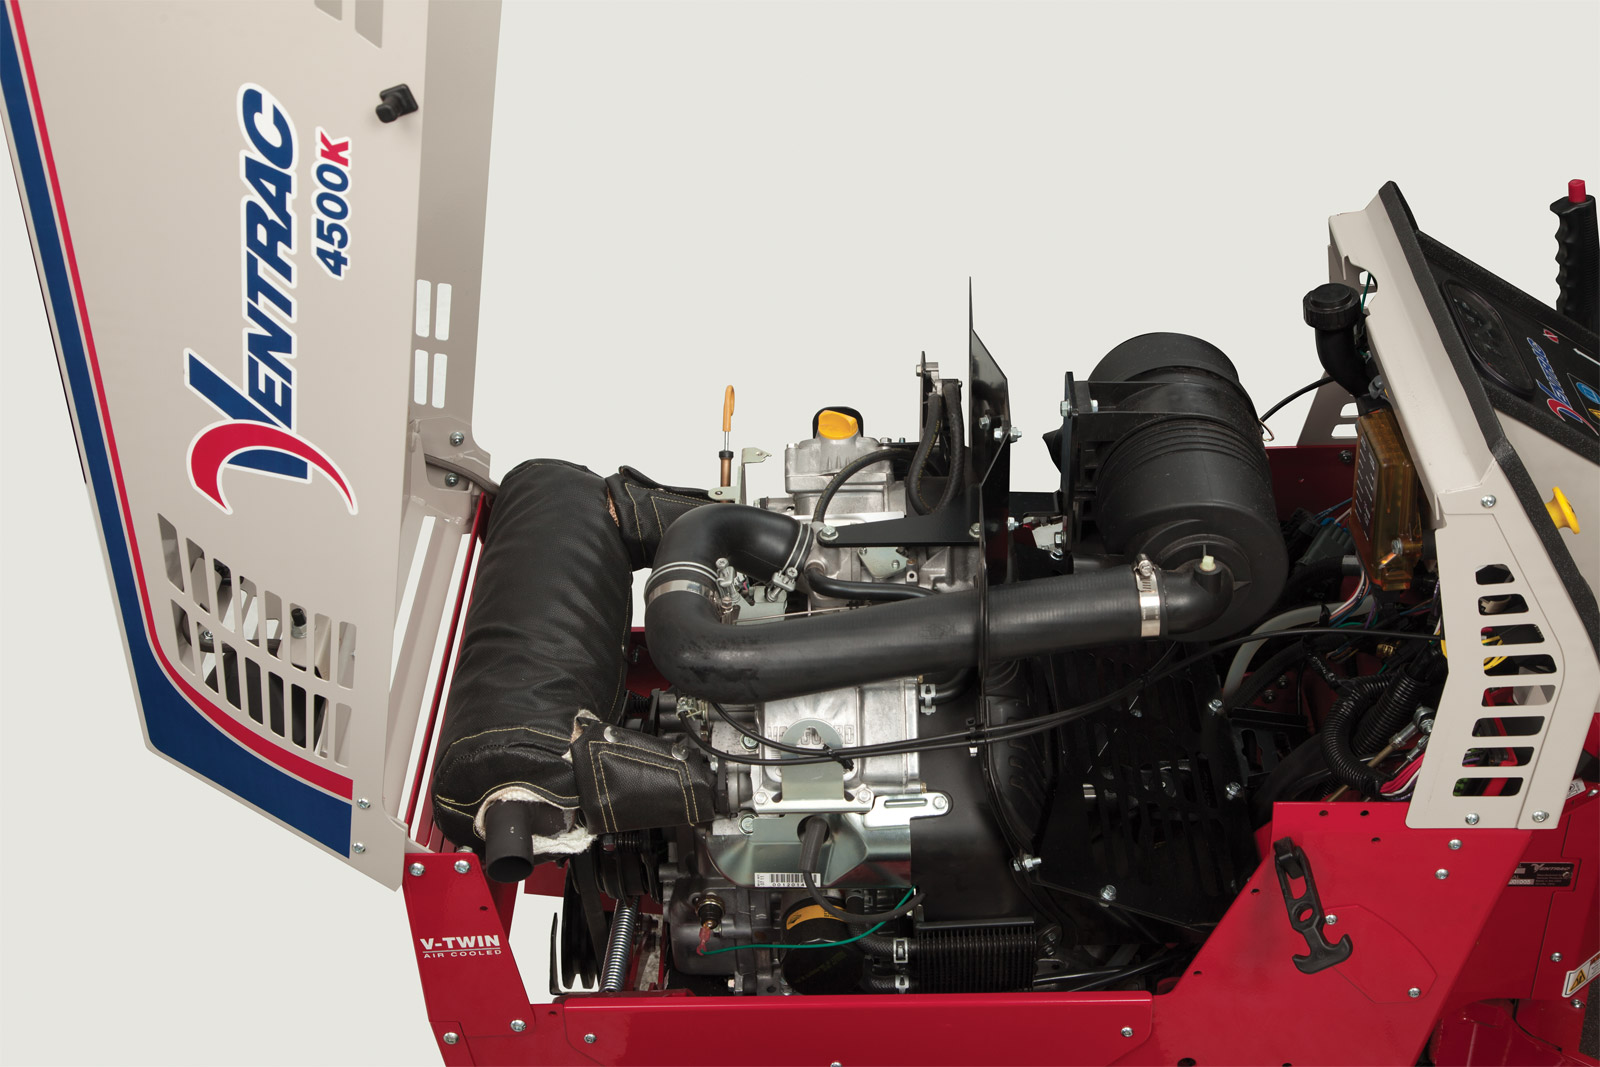 Press Link · Ventrac 4500K Compact Utility Tractor Engine - The 4500K ...